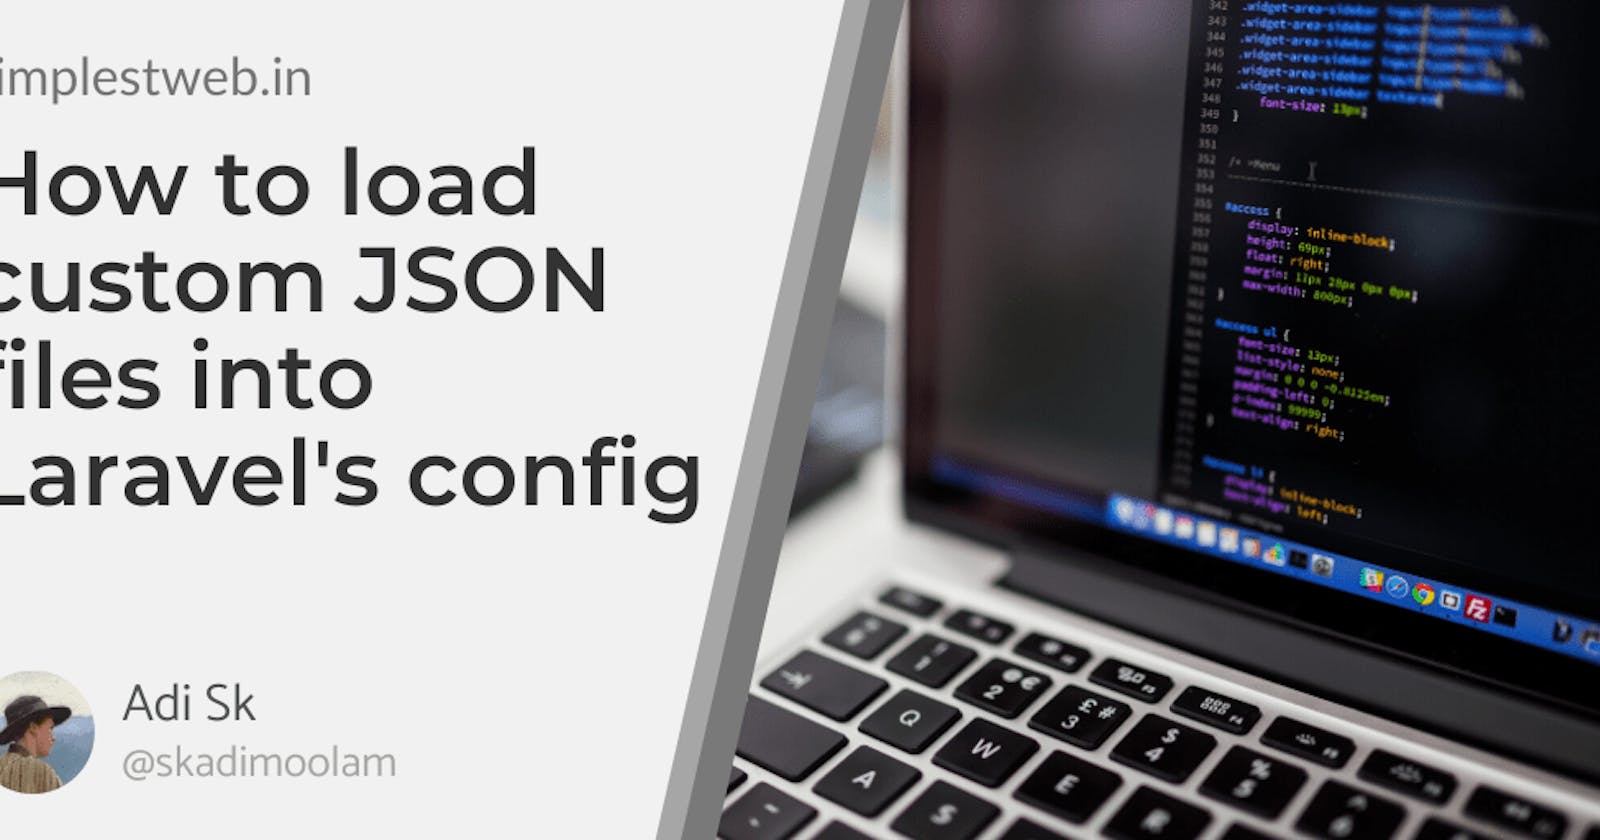 How to load custom JSON files into Laravel's config